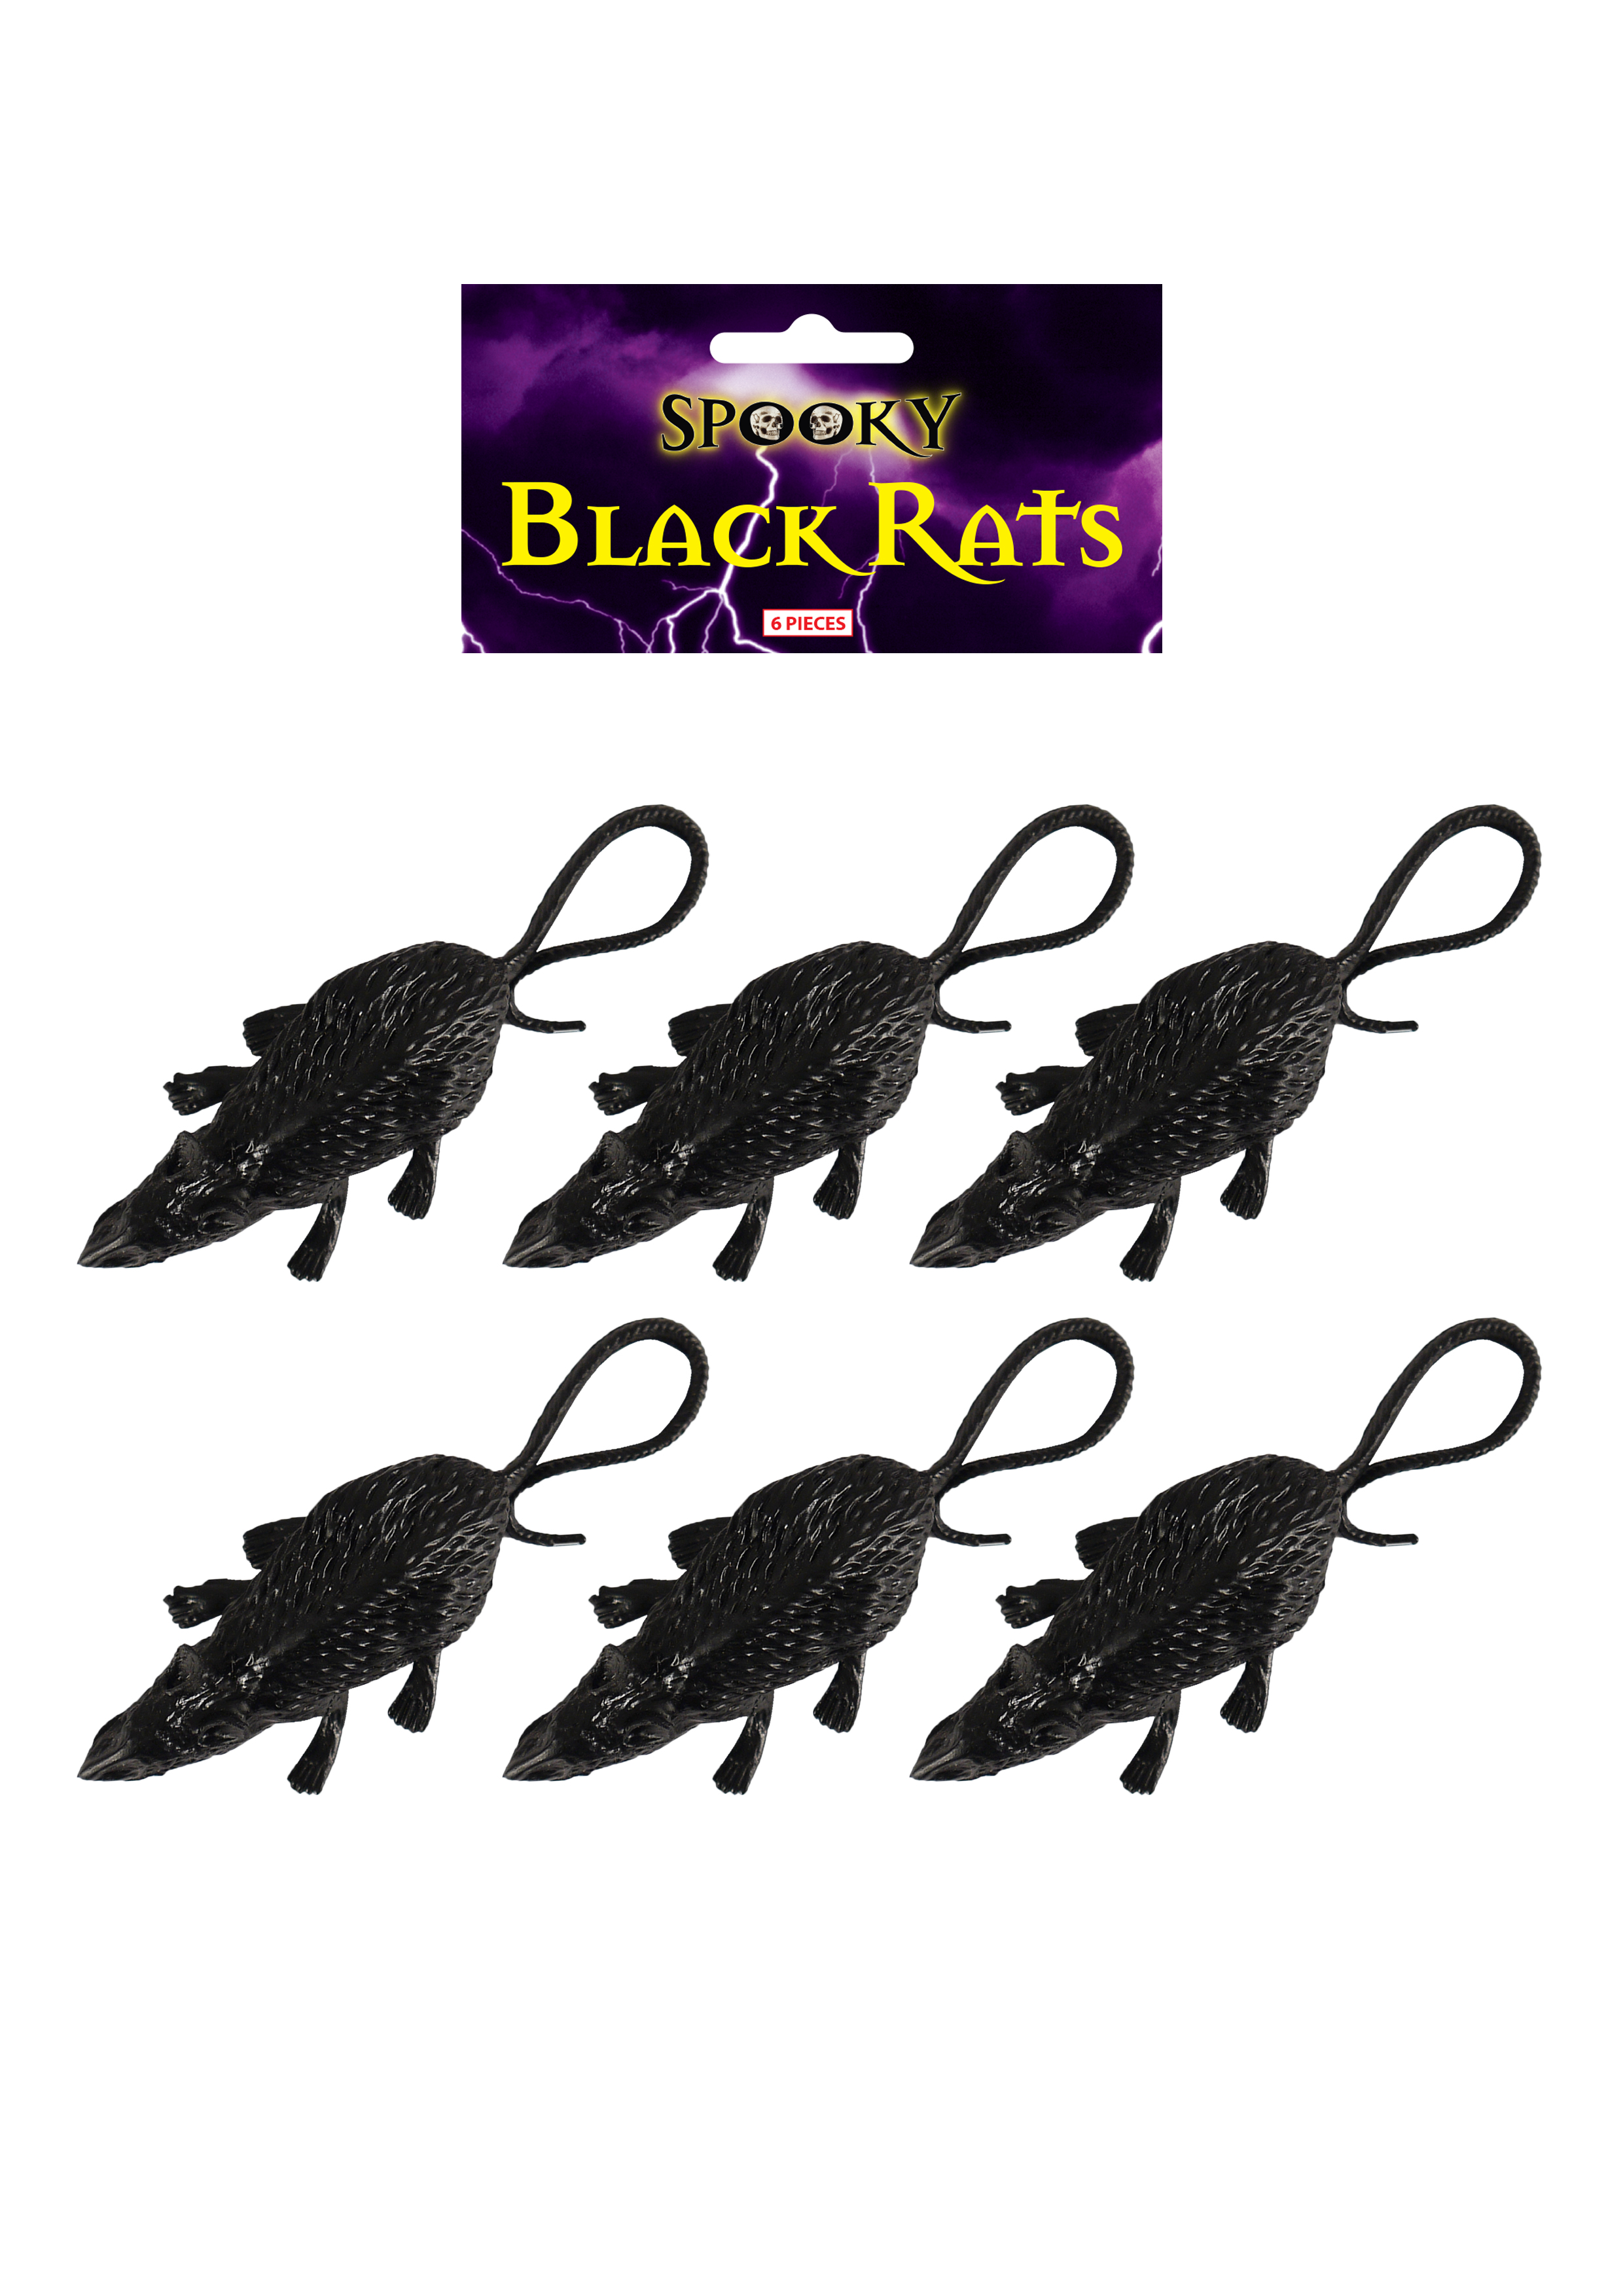 6 Black Plastic Rats - Halloween Toy Loot/Party Bag Fillers Decoration Scare